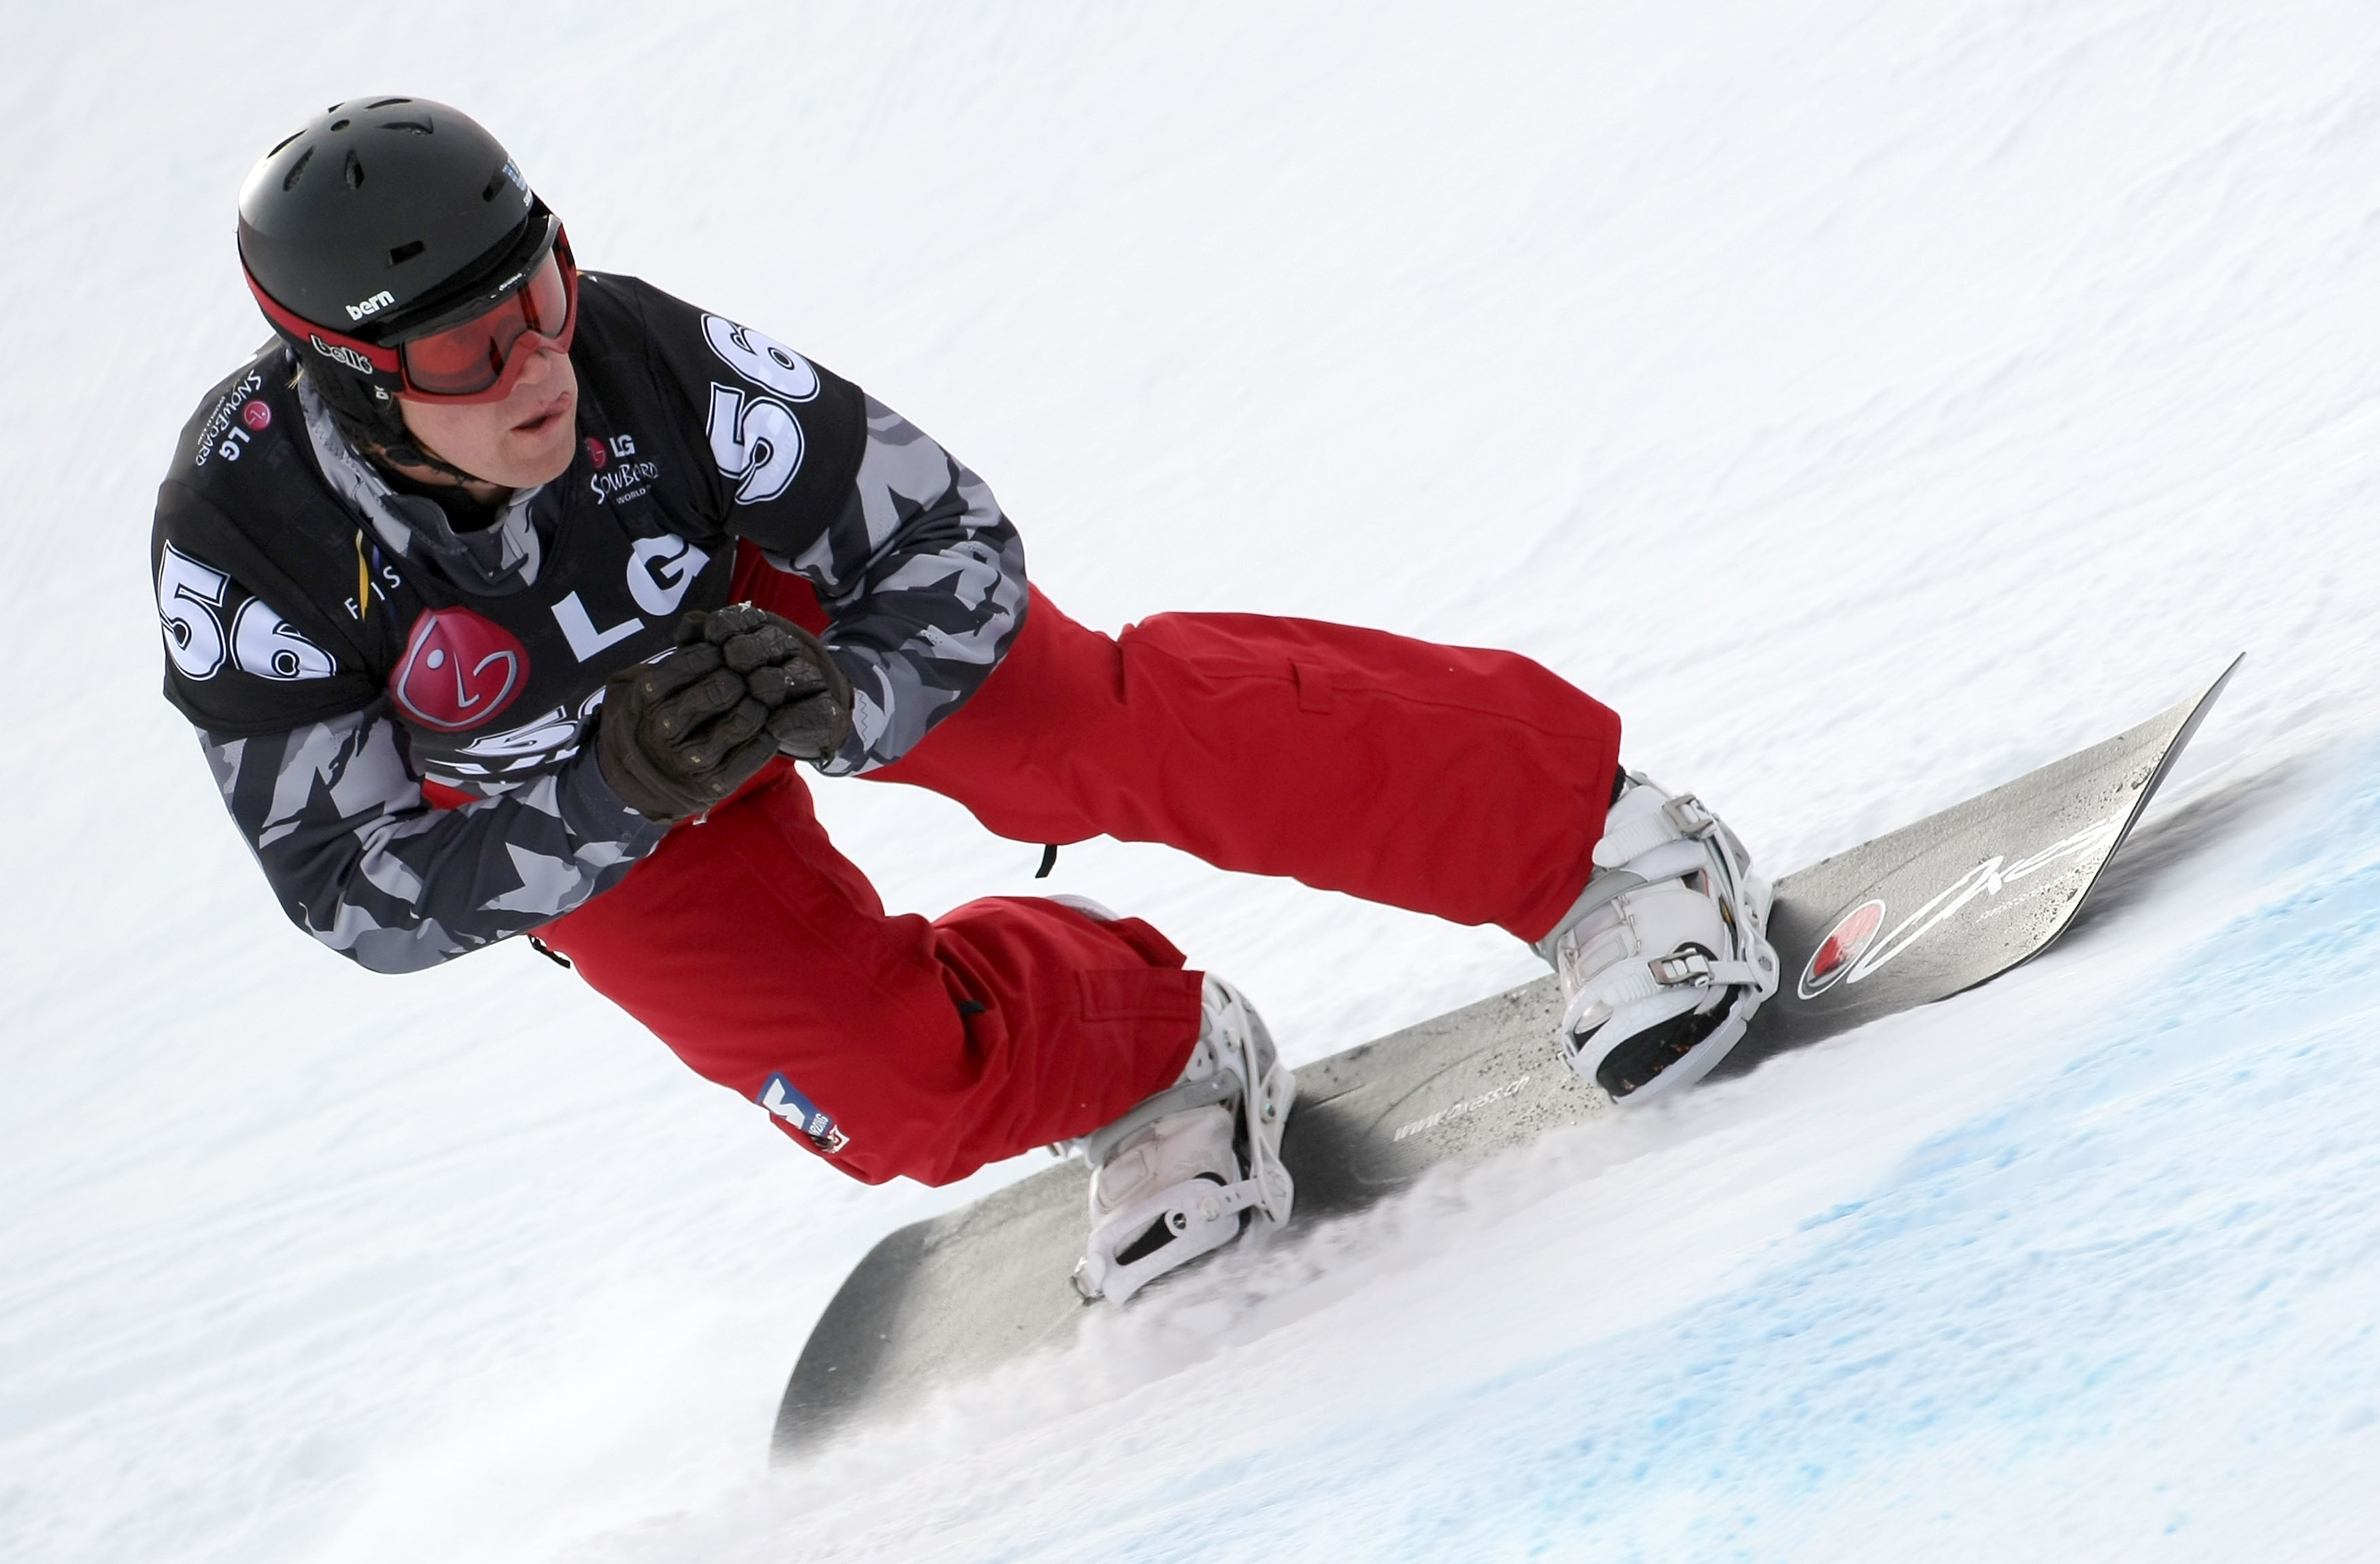 After X Games Aspen snub, Shaun White weighs competing in Oslo X